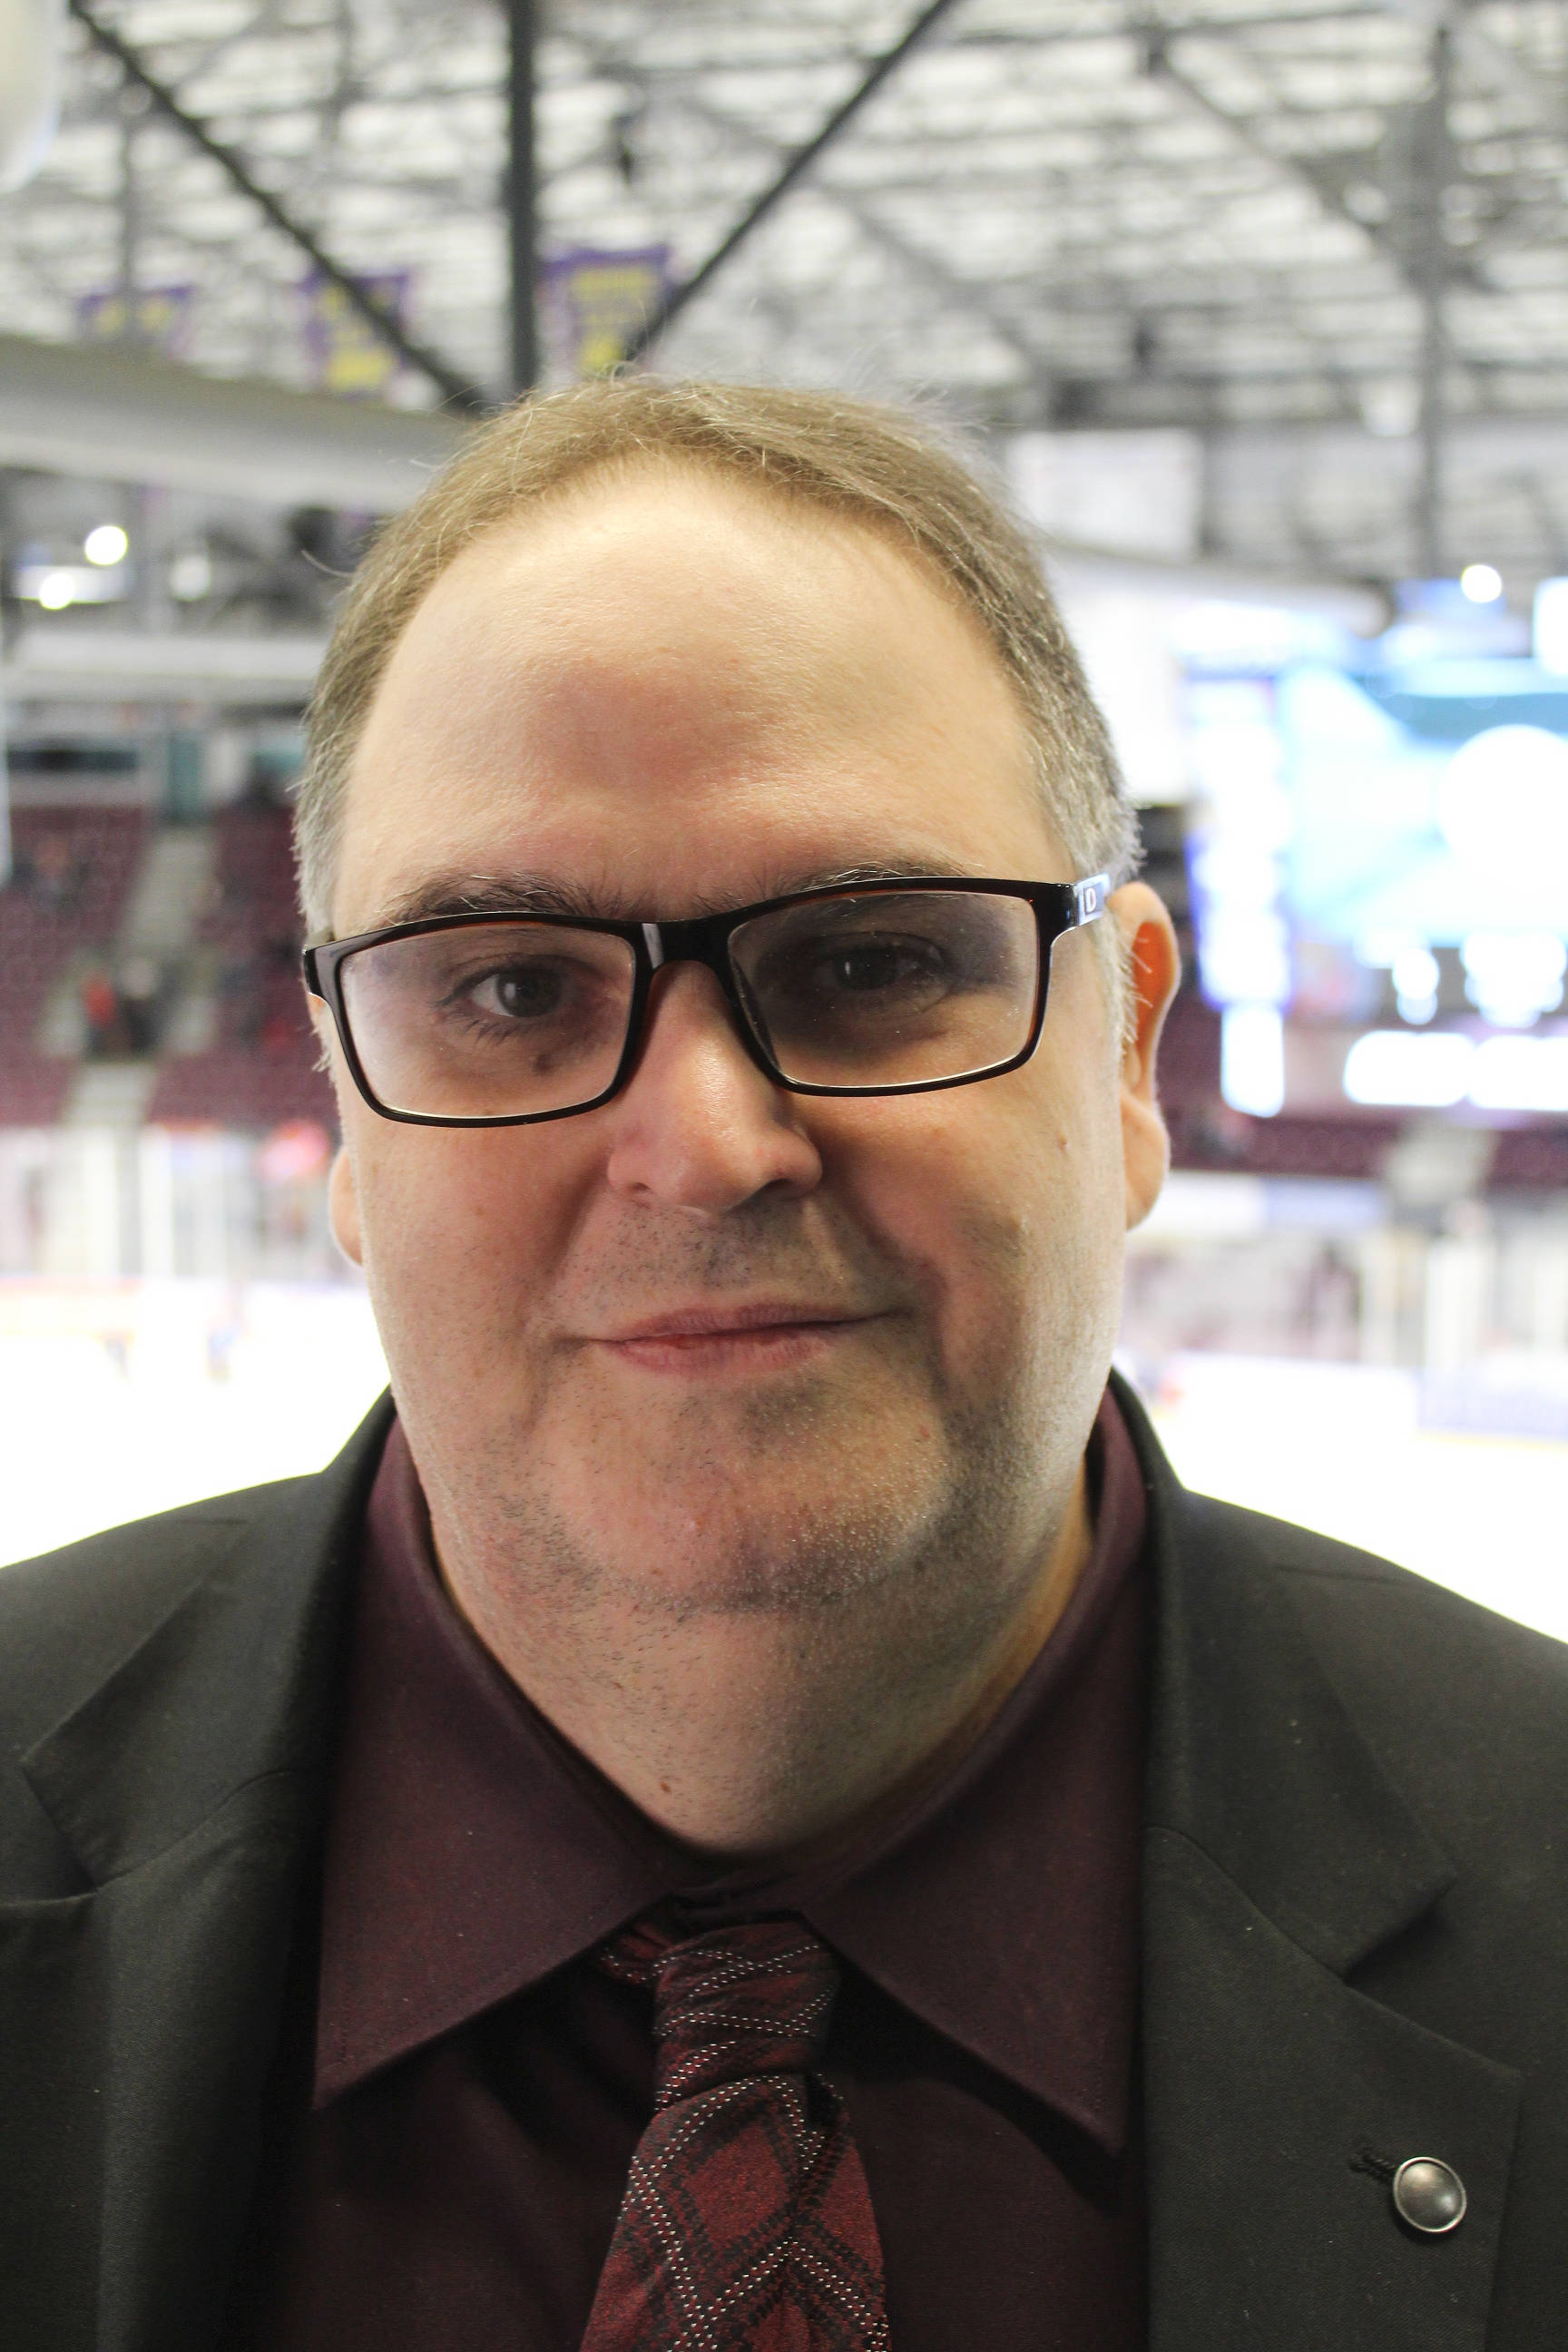 Community mourns death of Dale Hawerchuk - Barrie News